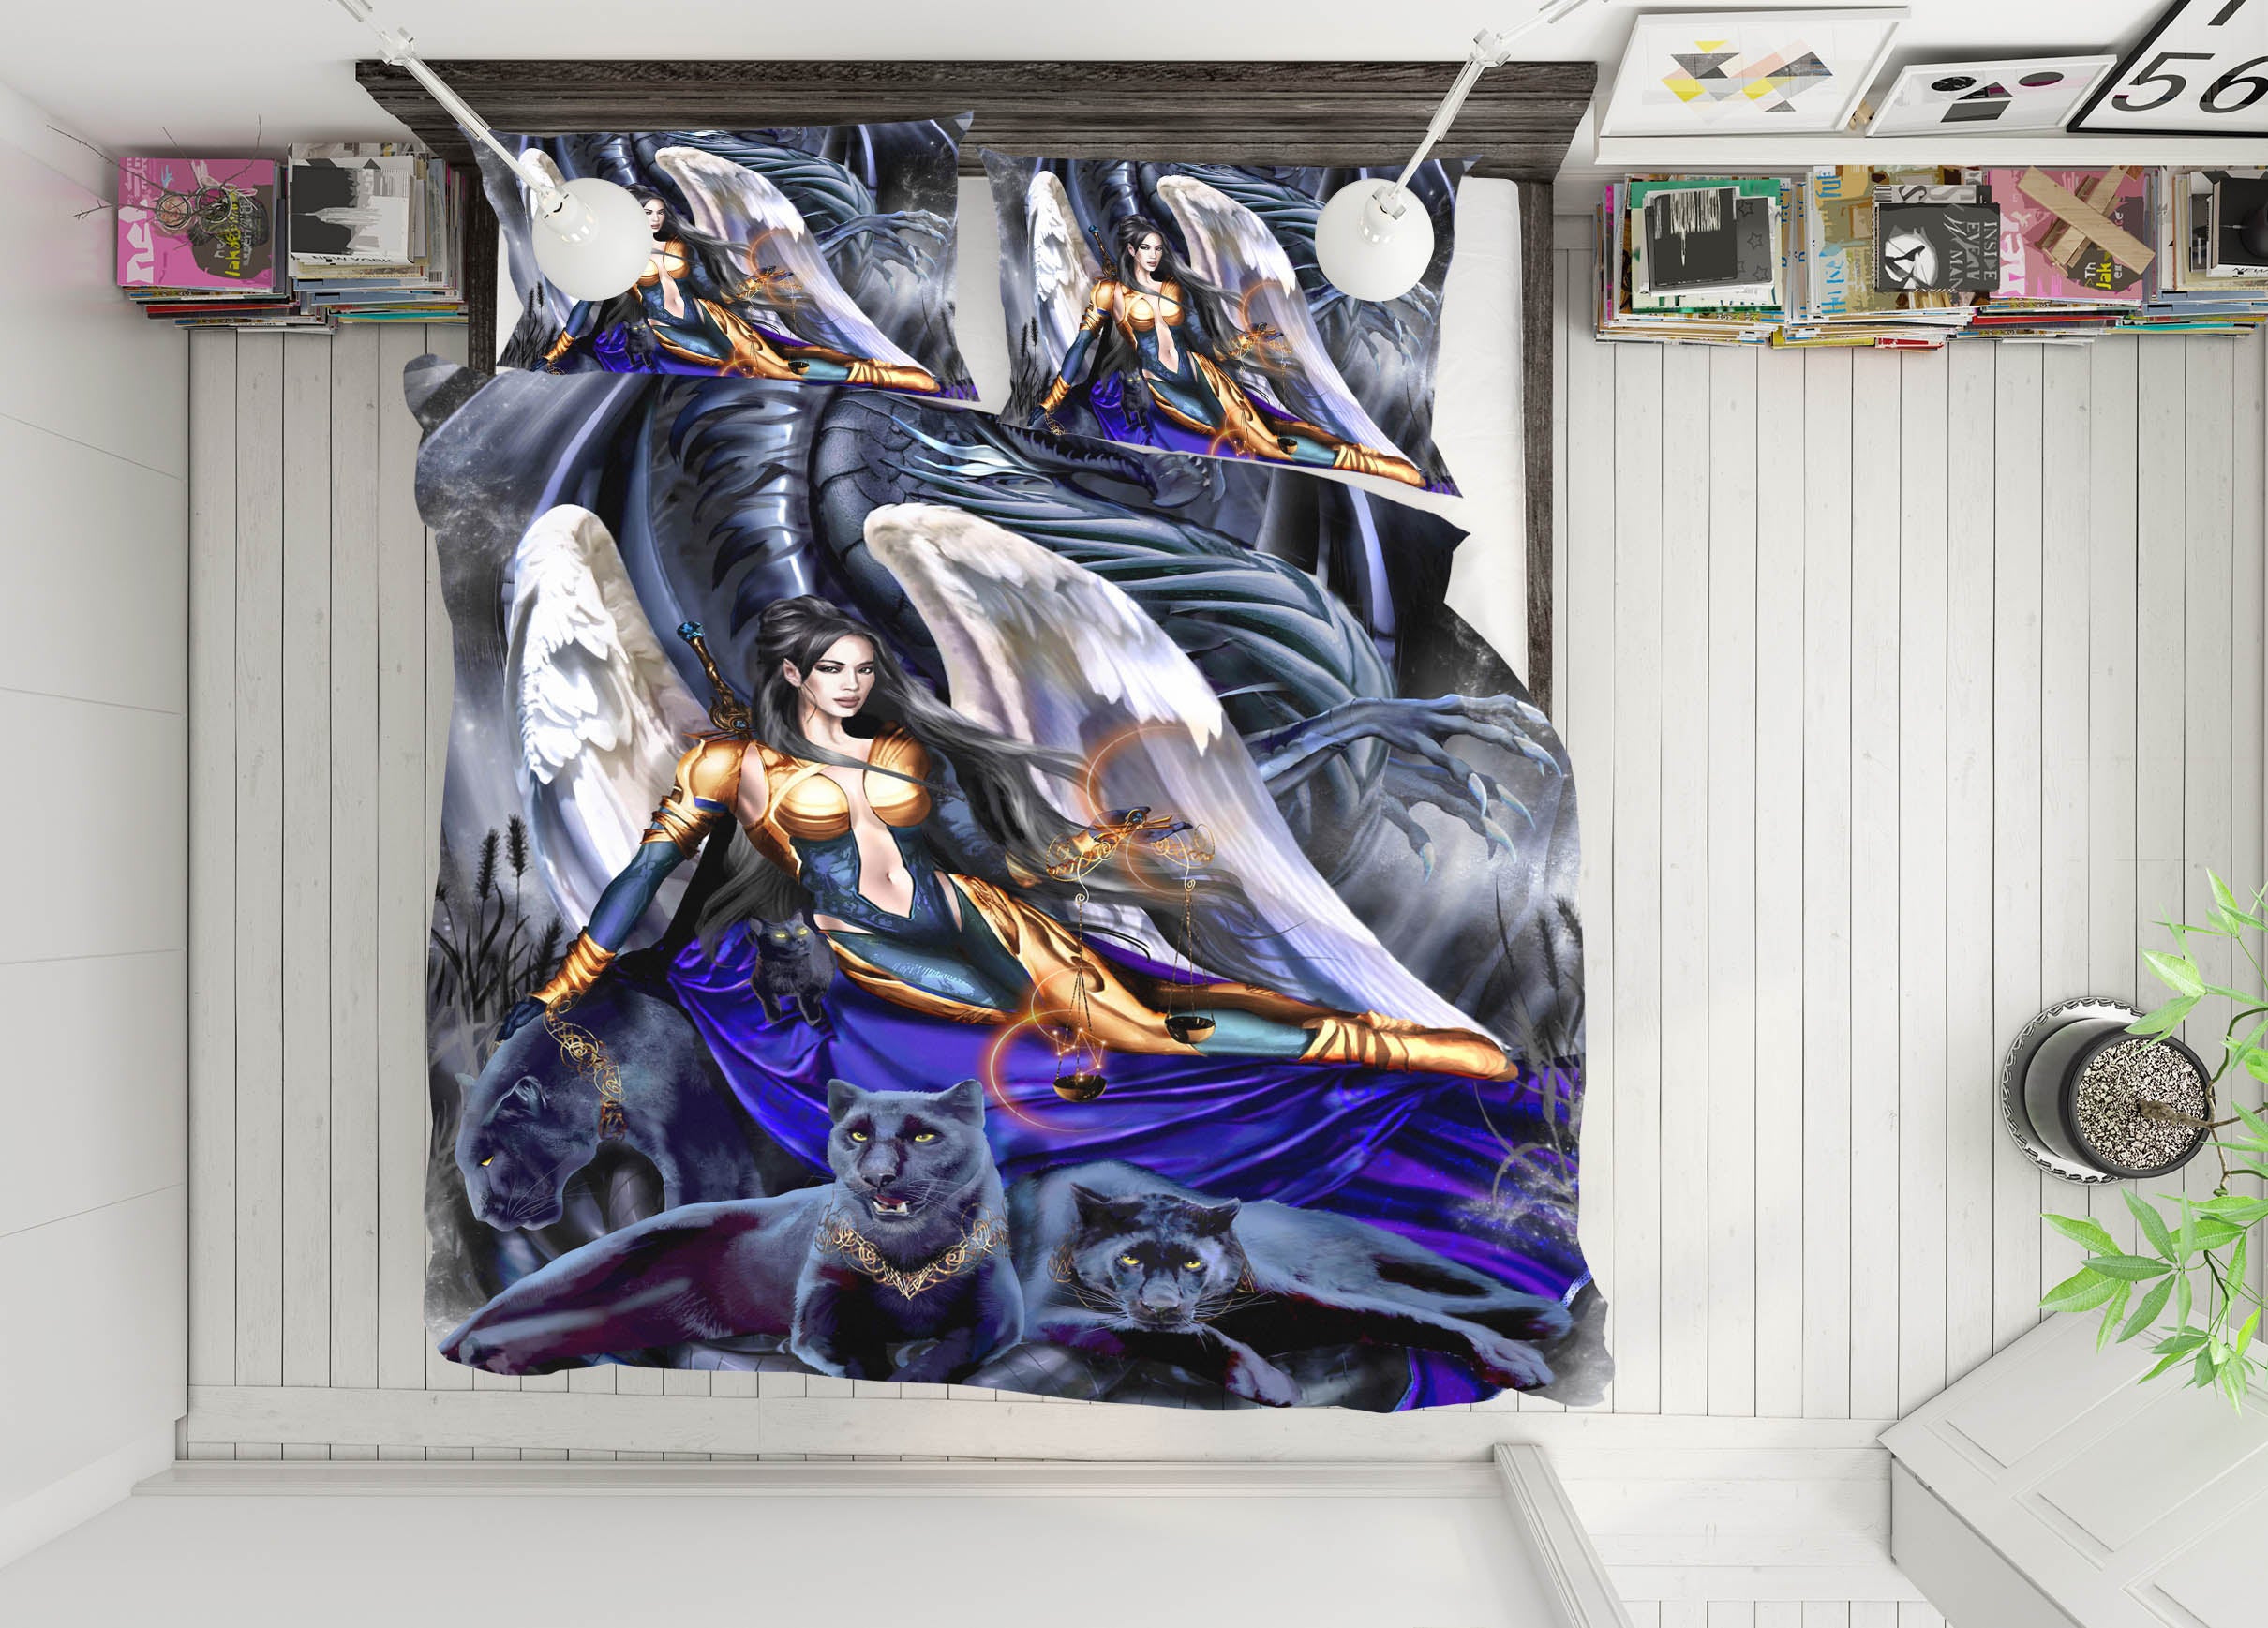 3D Dragon Woman 8334 Ruth Thompson Bedding Bed Pillowcases Quilt Cover Duvet Cover